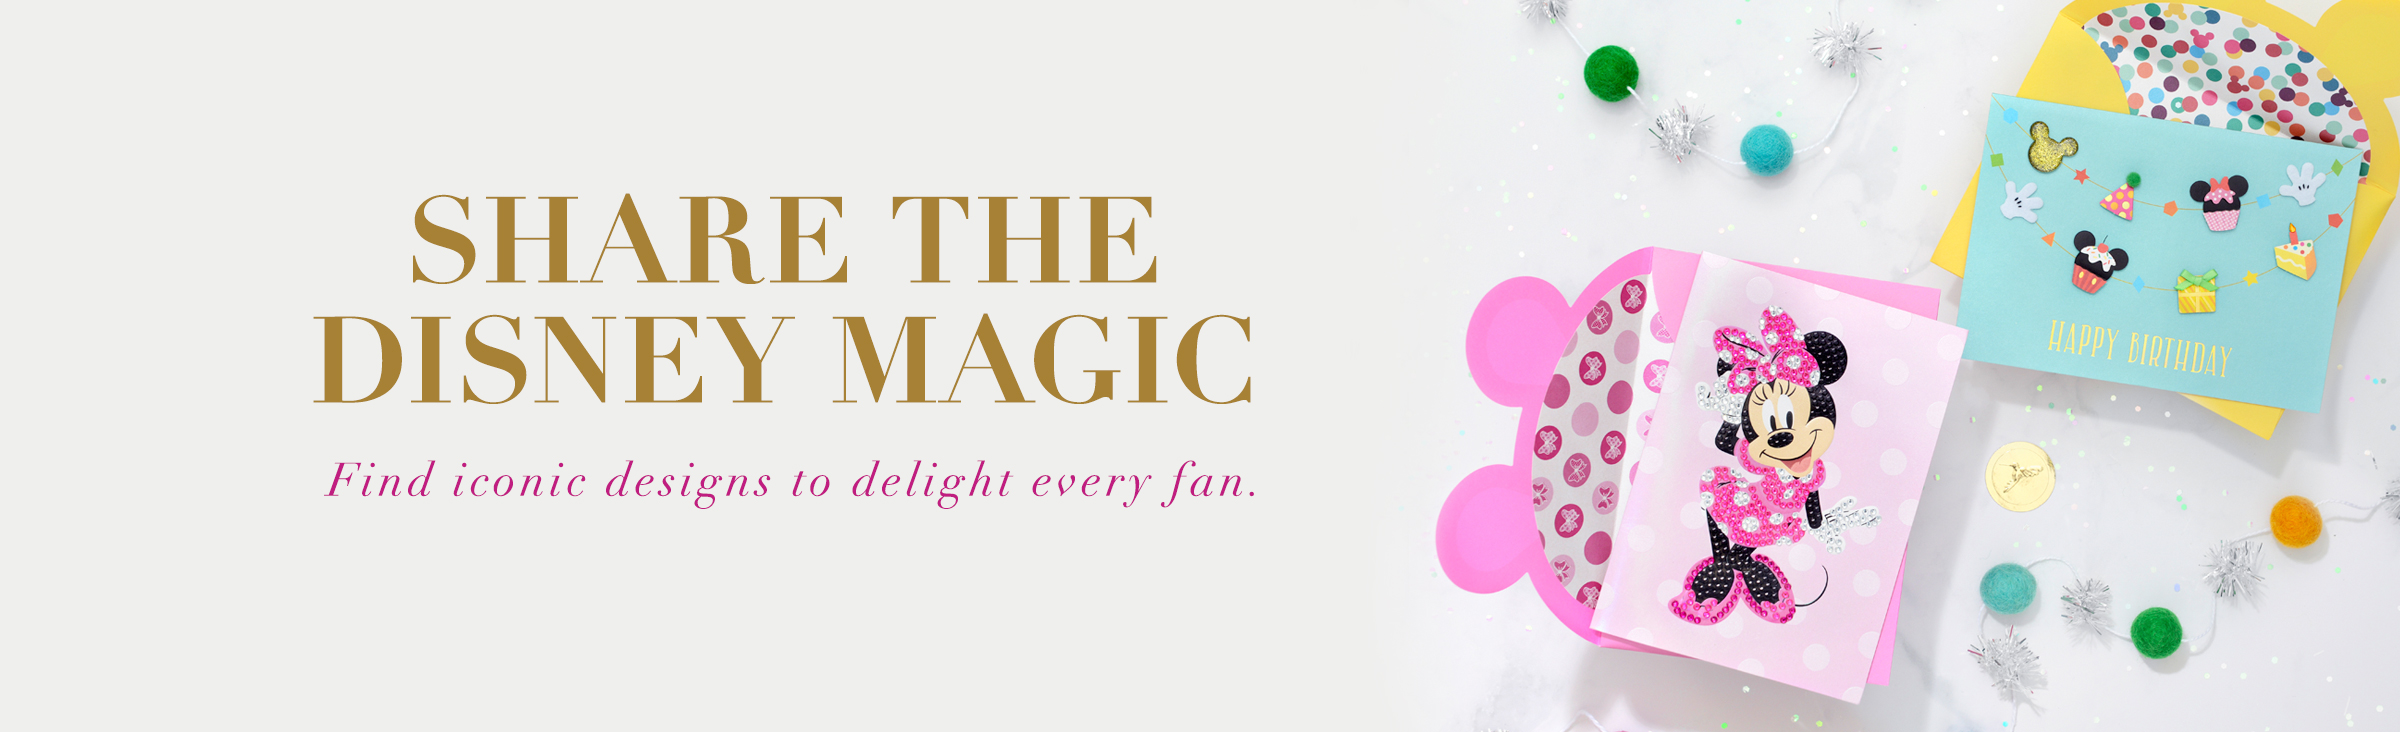 Share the Disney Magic Find iconic designs to delight every fan